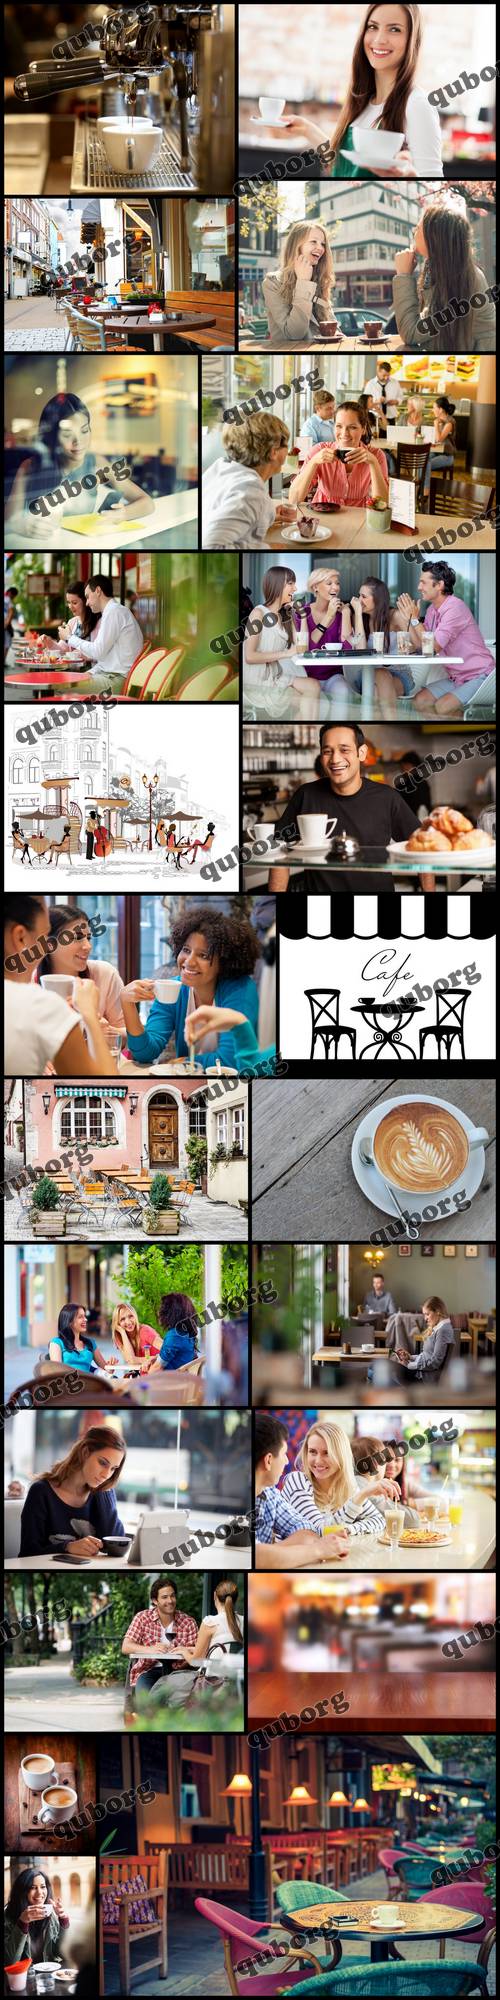 Stock Photos - People in Cafe